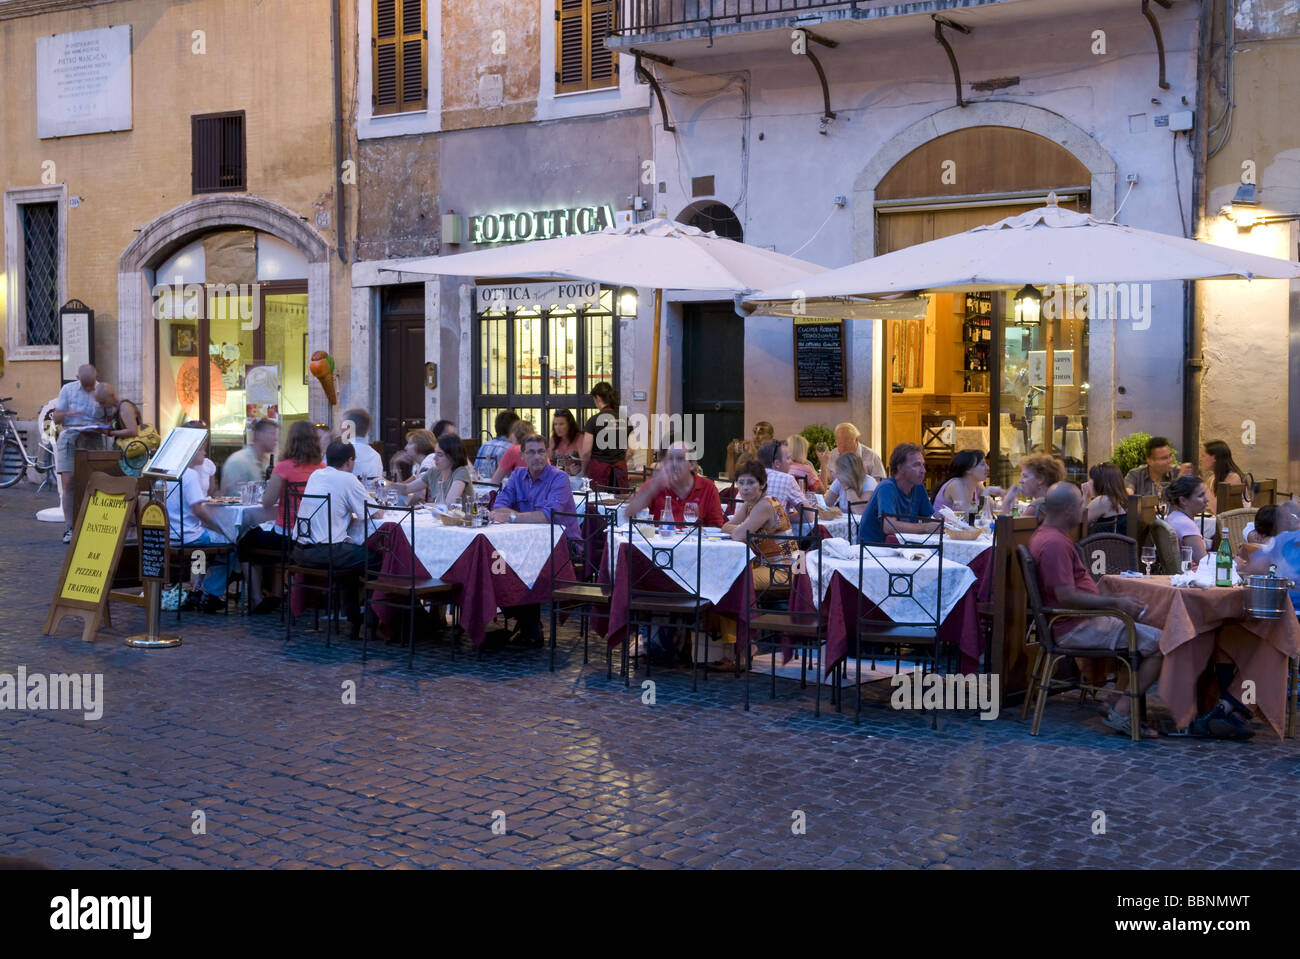 Geographie/Reisen, Italien, Rom, Piazza della Rotonda, Restaurant, Cafe, Additional-Rights - Clearance-Info - Not-Available Stockfoto